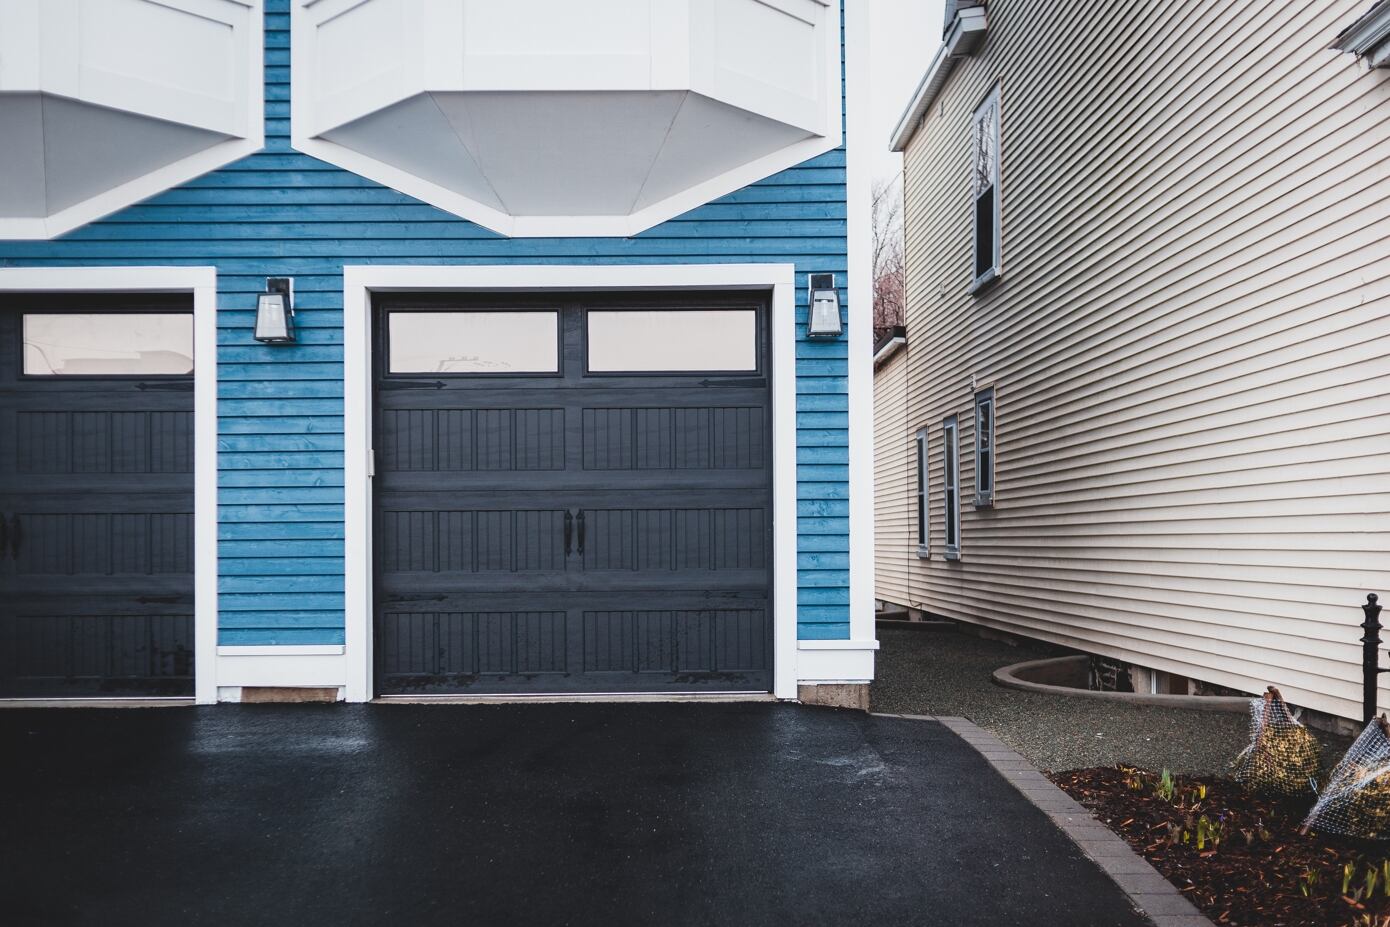 From DIY to Pro: How to Make the Most of Your Home Garage